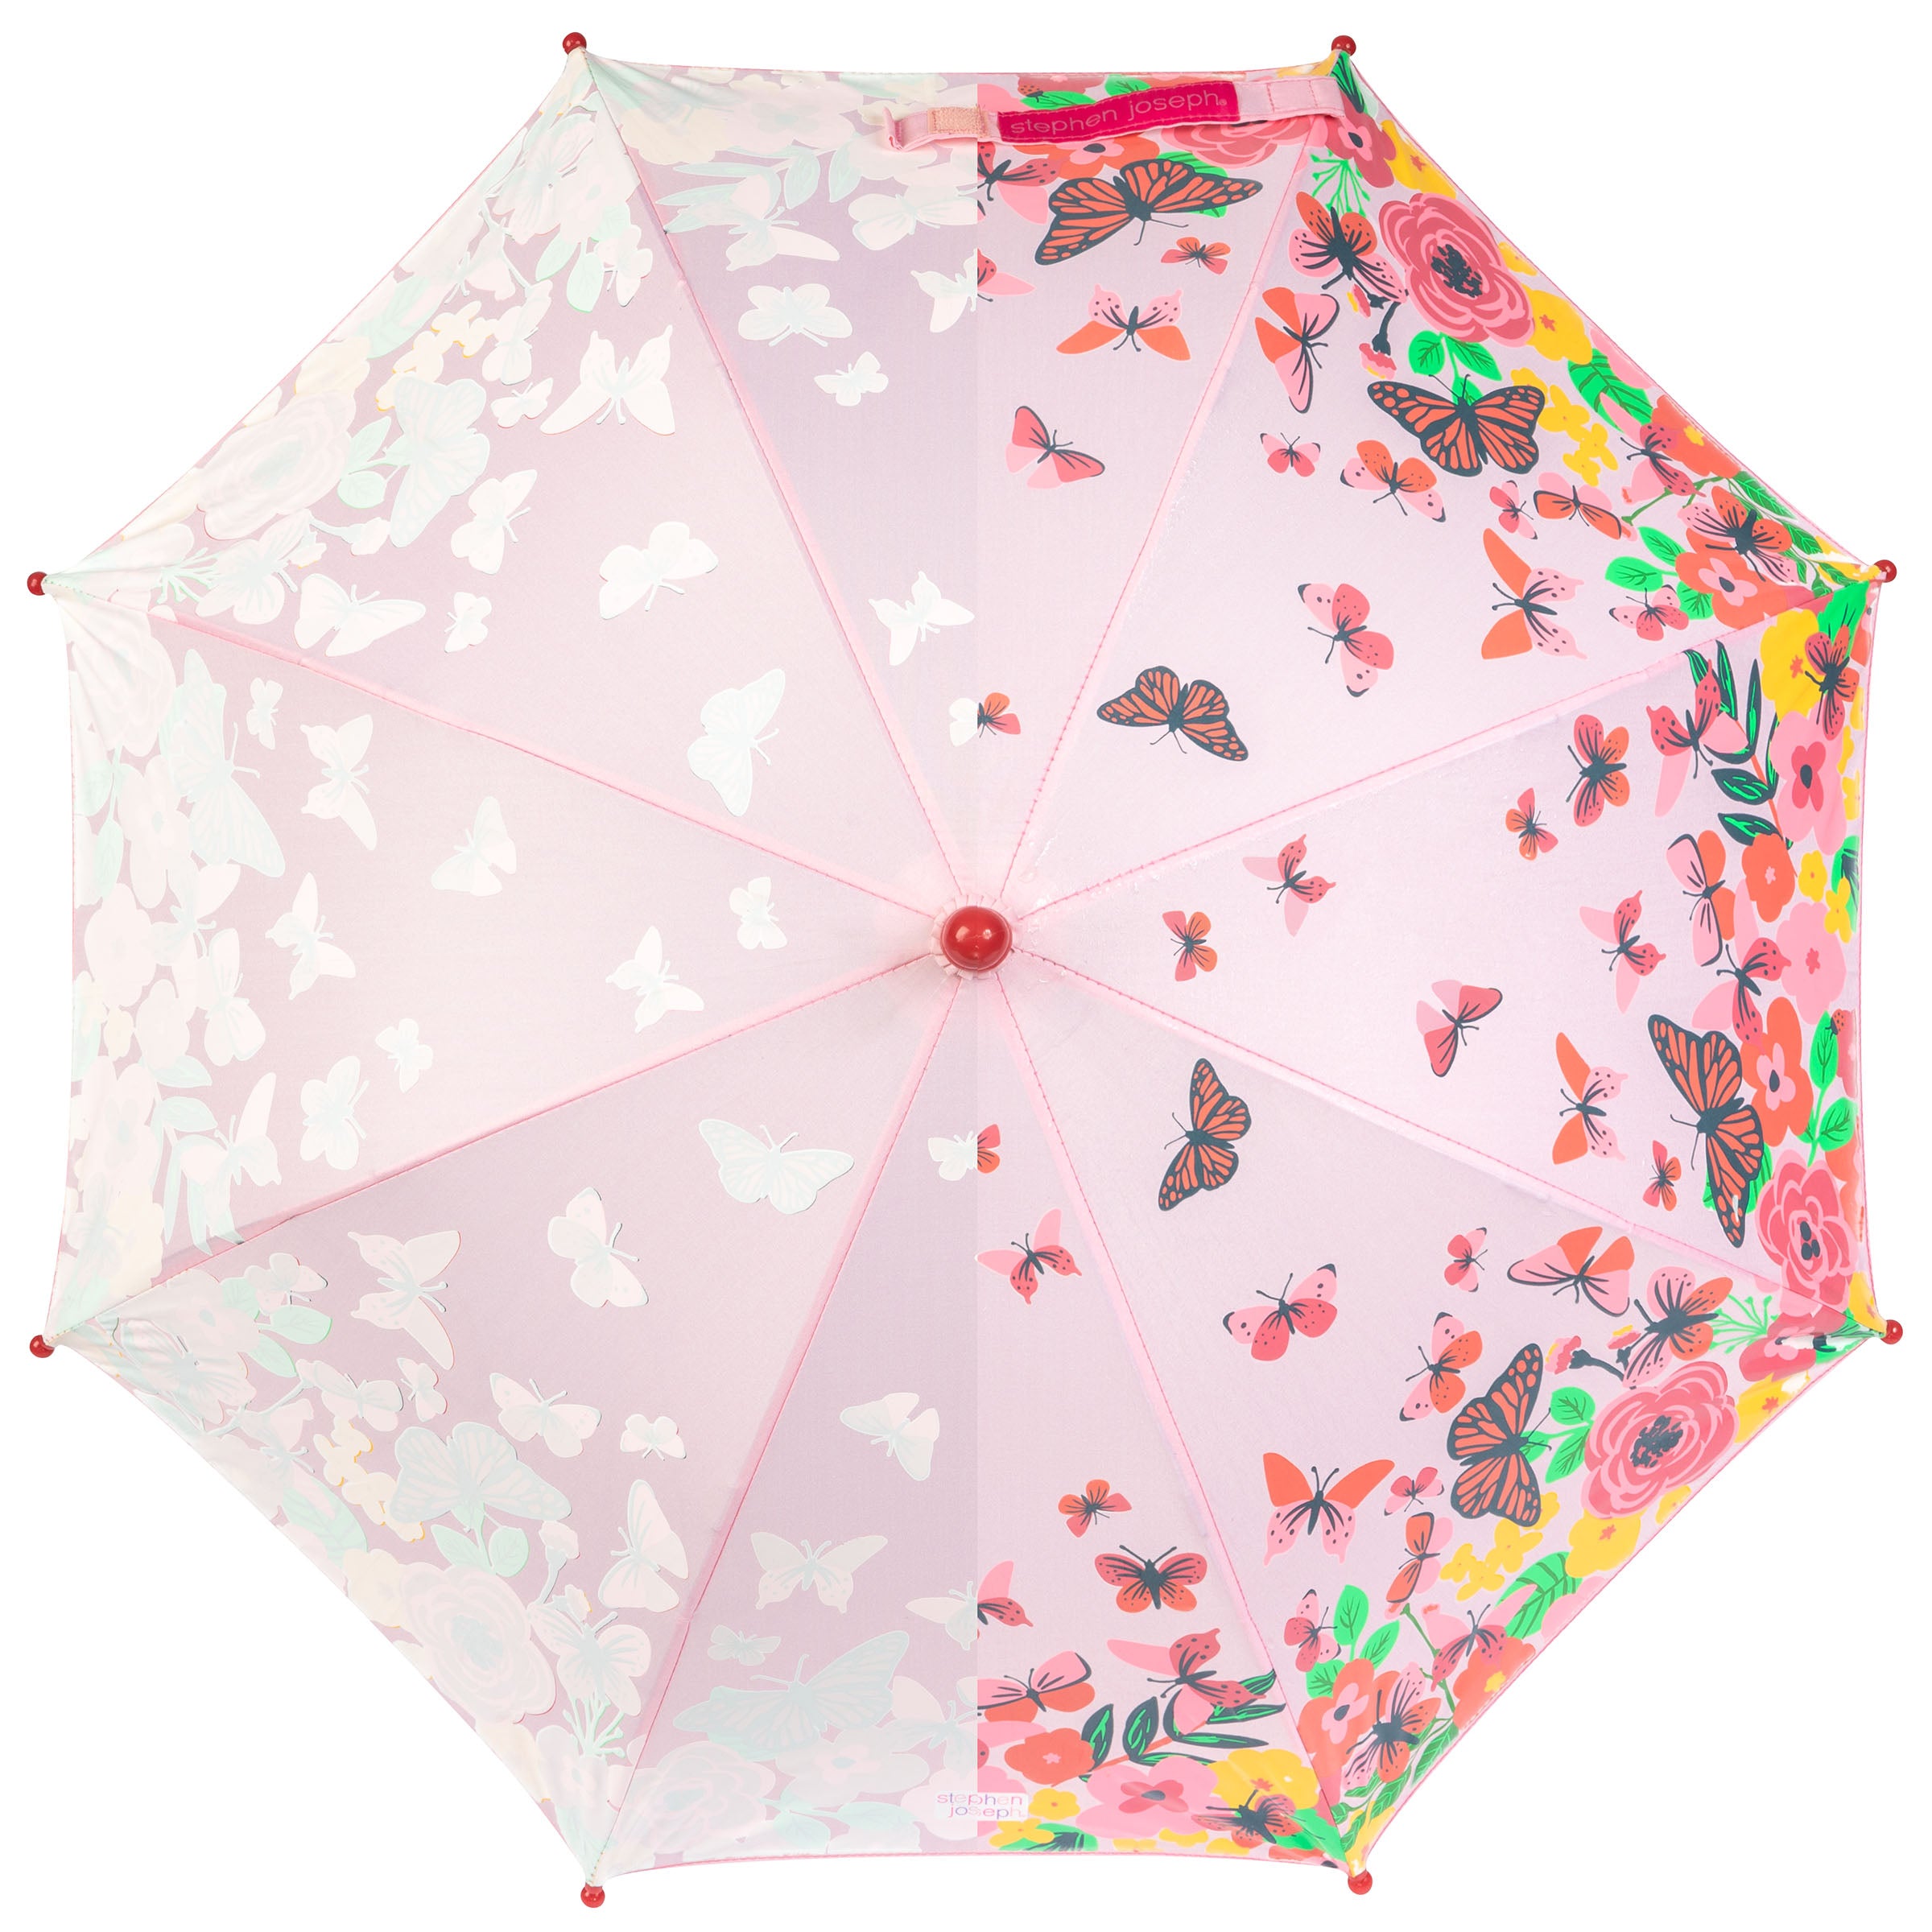 Color Changing Umbrellas Butterfly